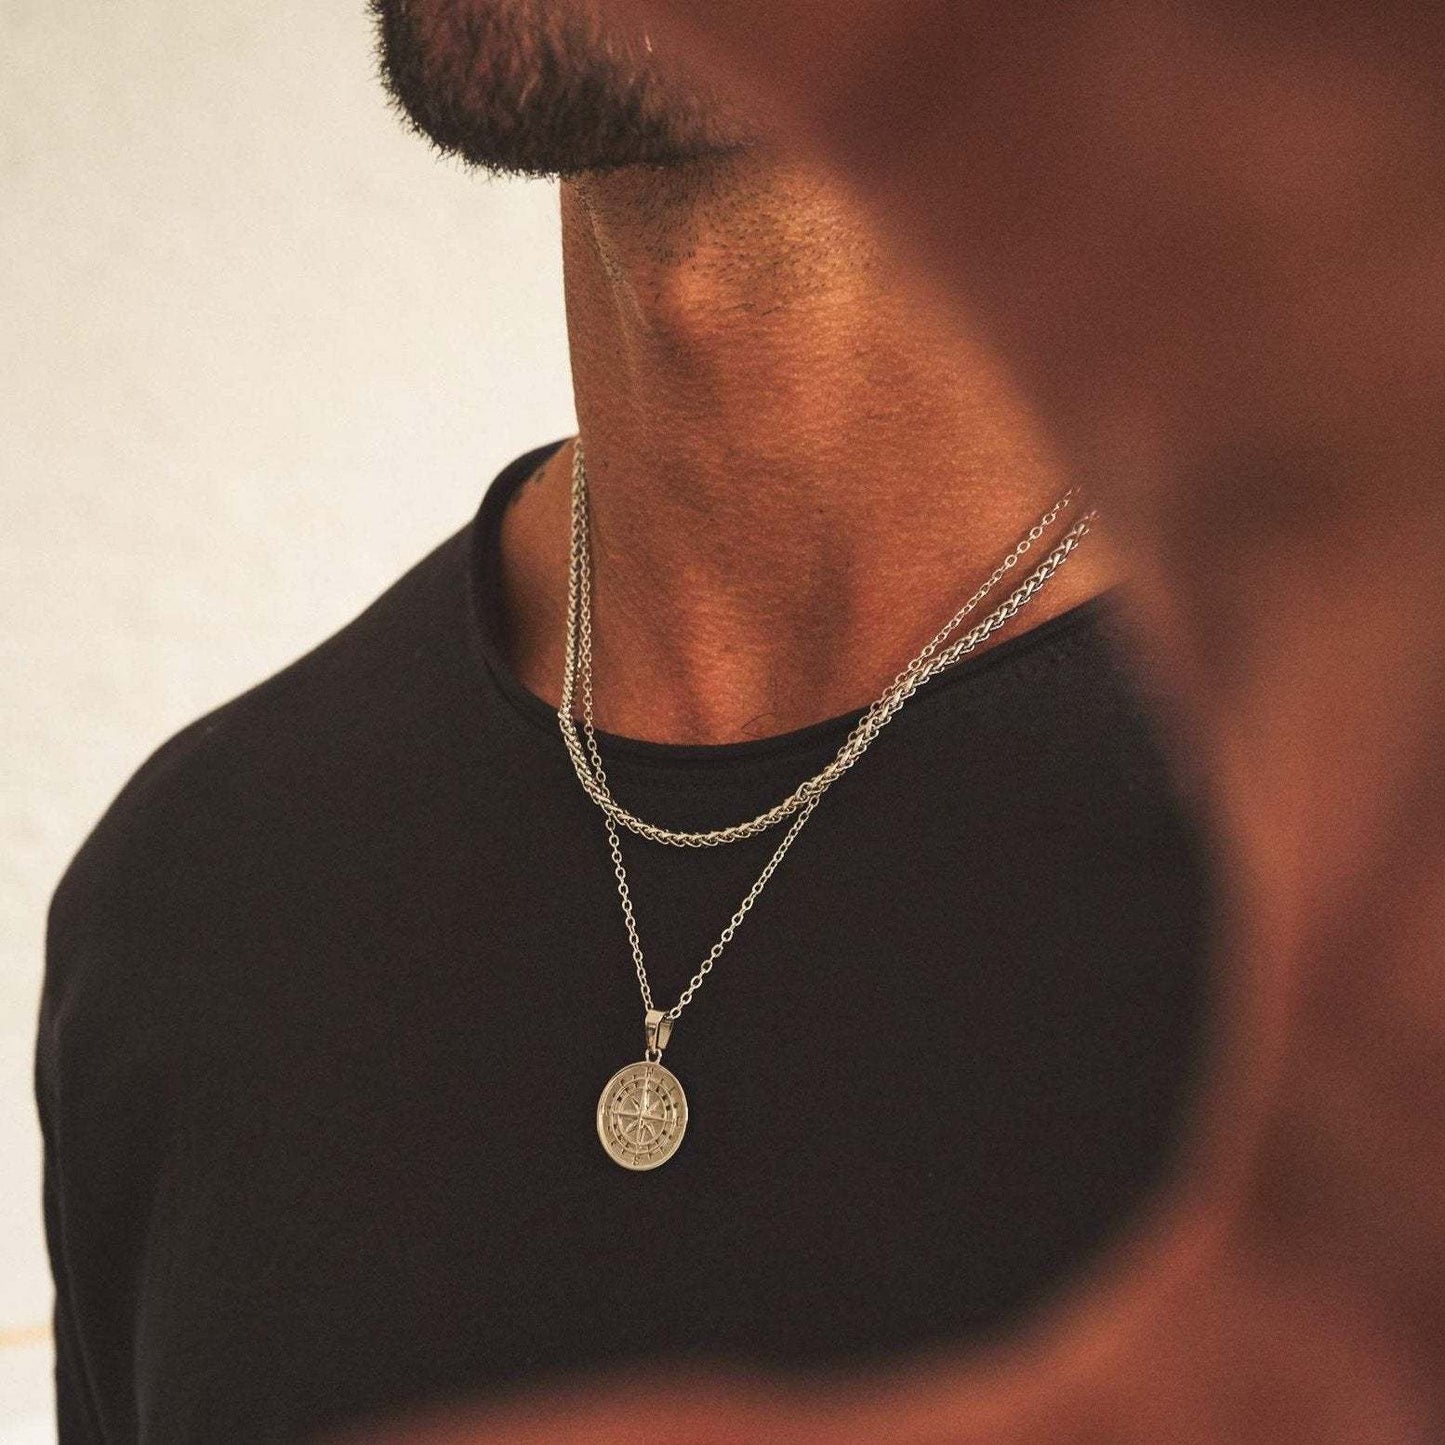 Layered Necklaces With Compass Pendant